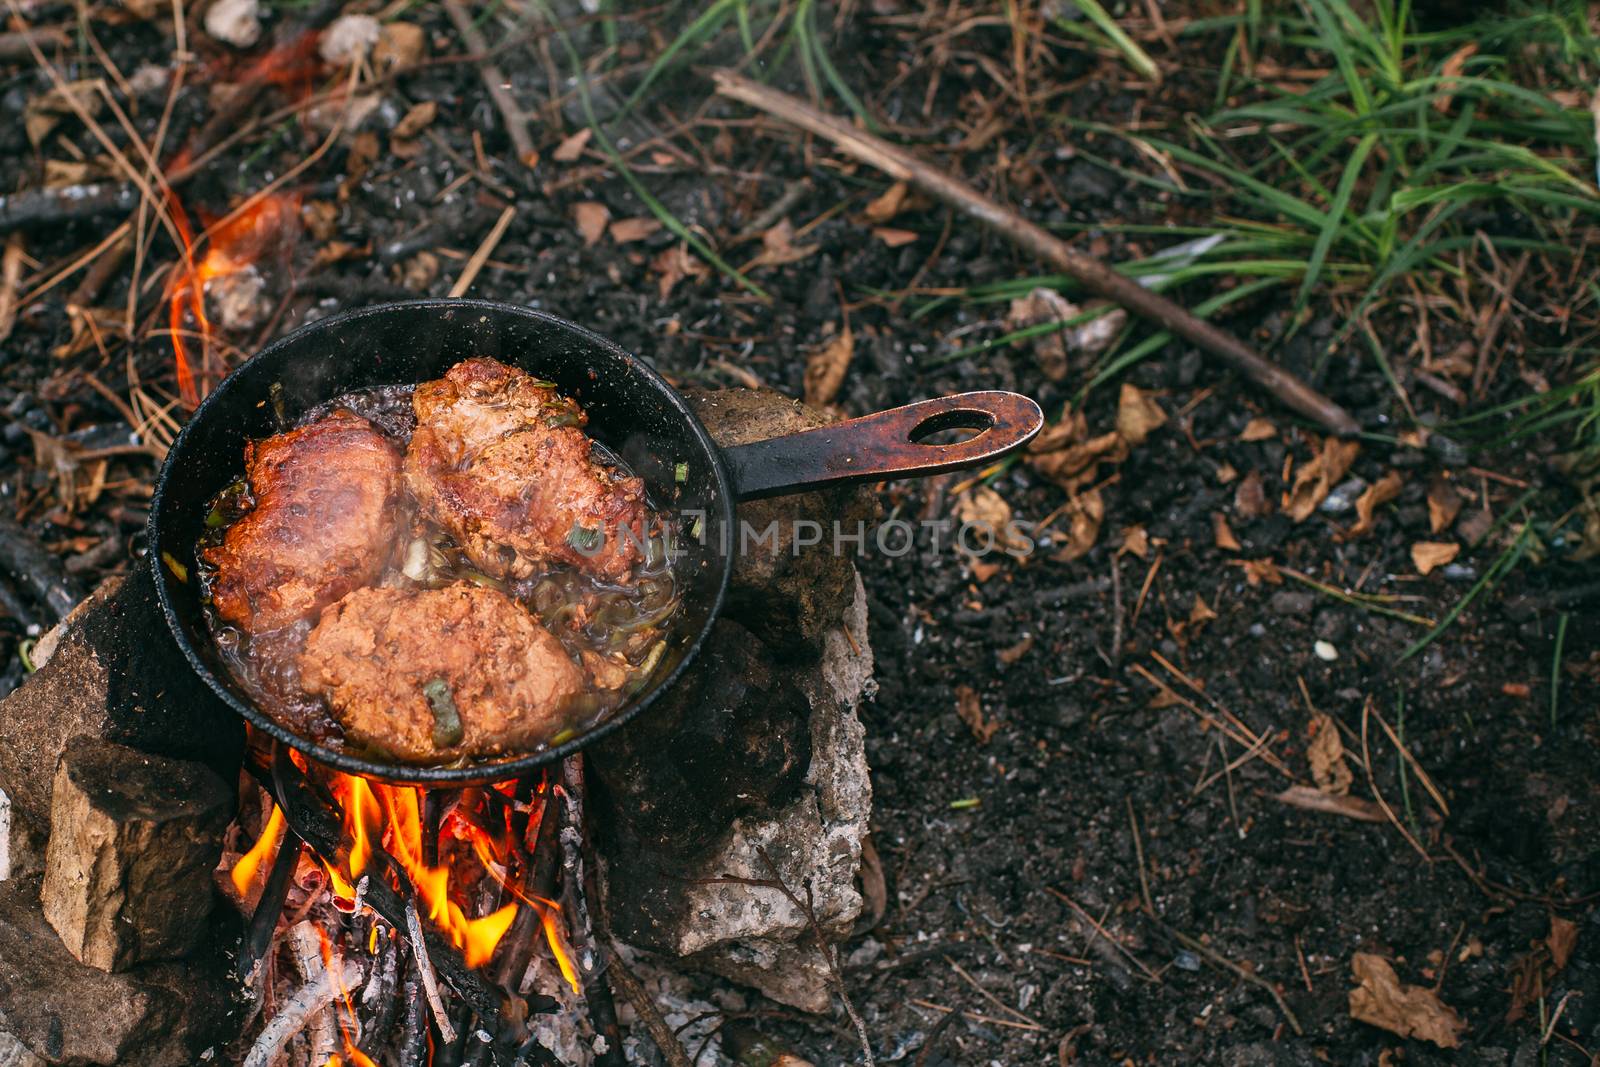 Frying meat in a pan over an open fire with leek. Steak in a pan on a fire. Cooking in nature. Picnic. Grill on fire. Cooking meat in wine.